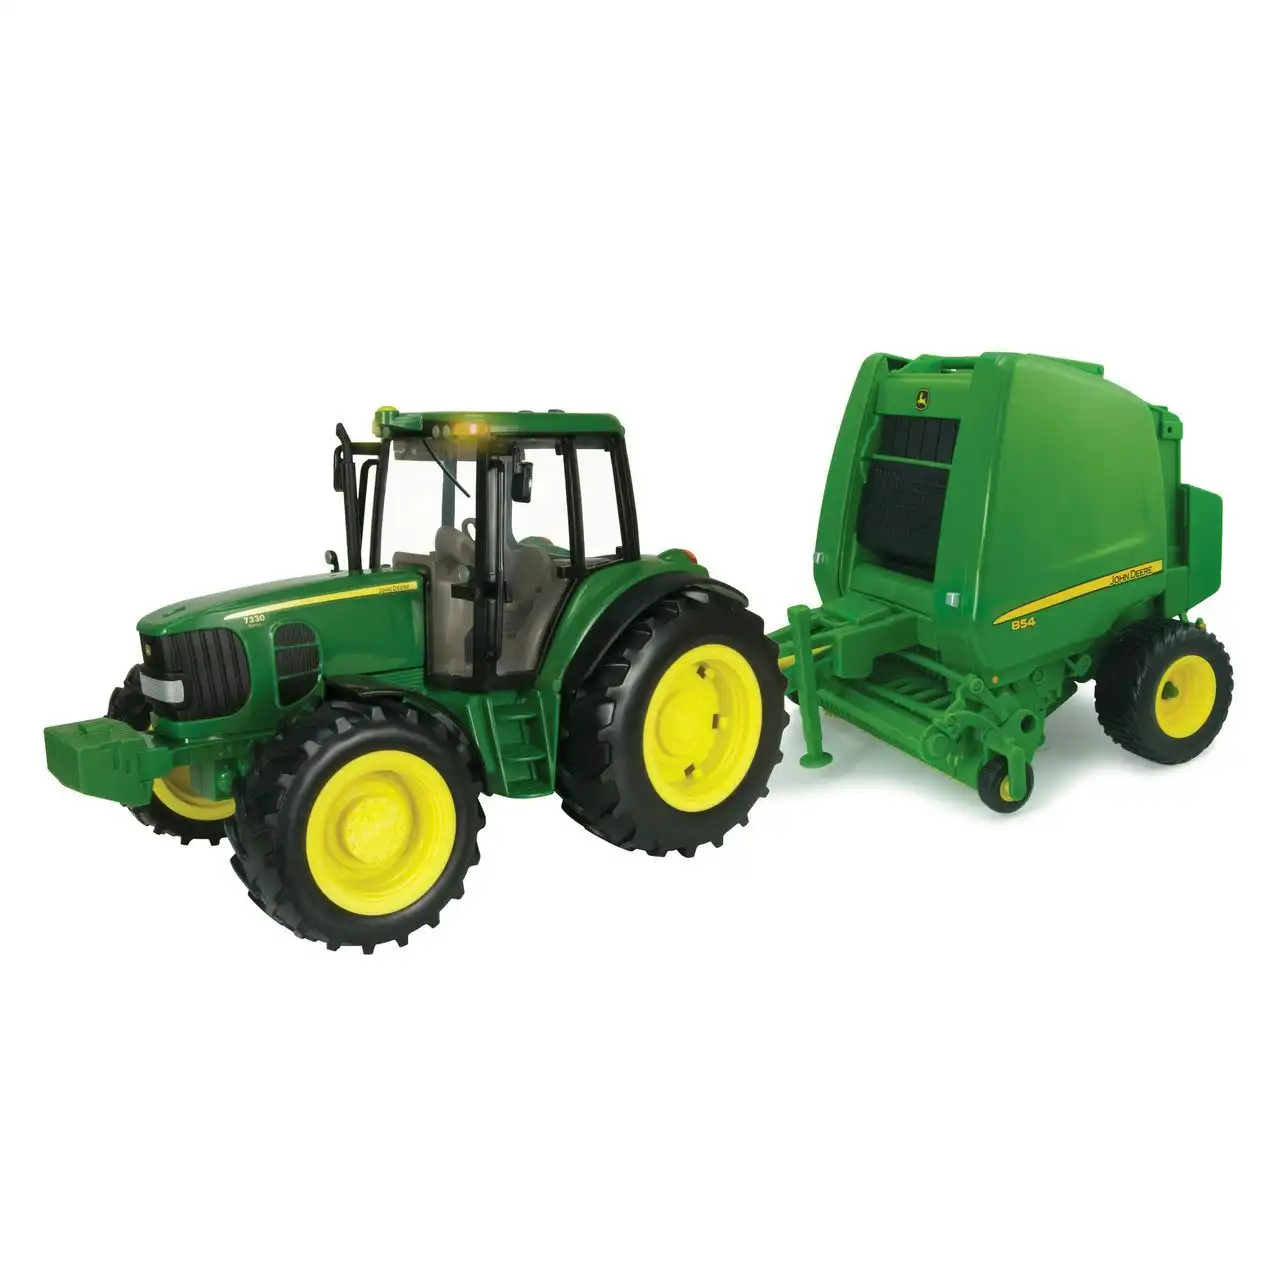 John Deere - Tomy 7330 Tractor with Lights & Sounds and Round Baler 1:16